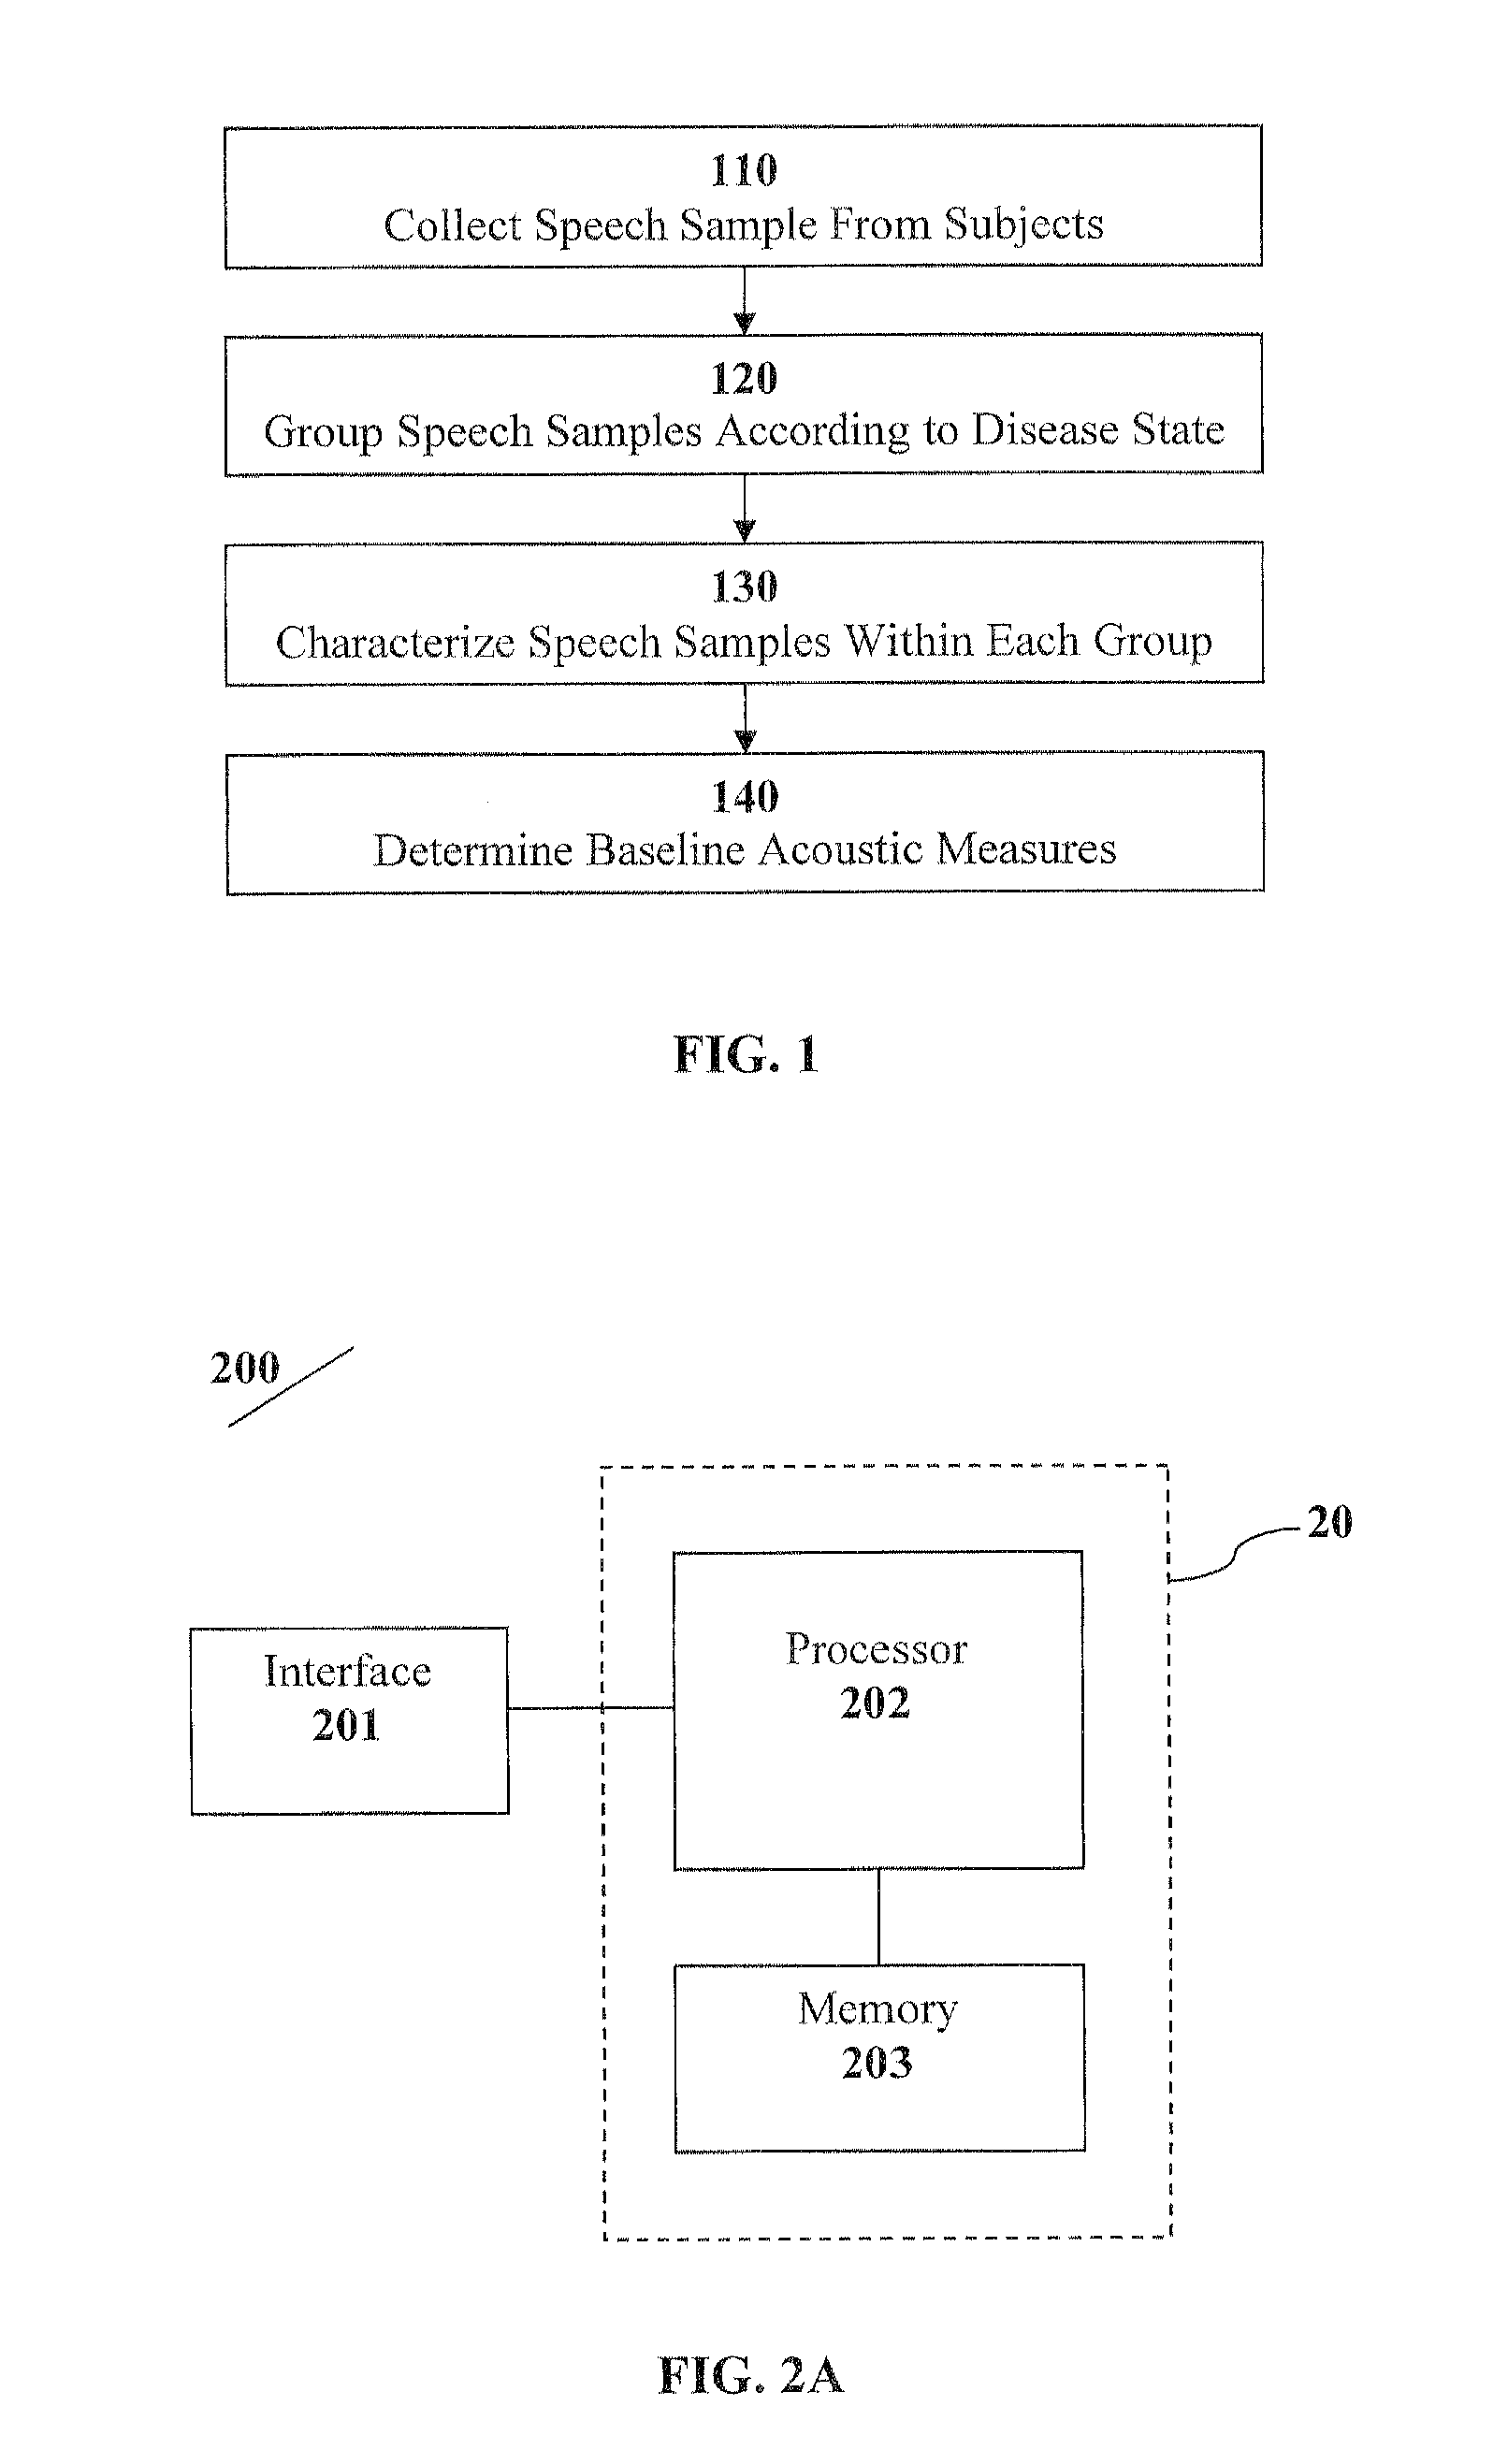 Systems and methods of screening for medical states using speech and other vocal behaviors